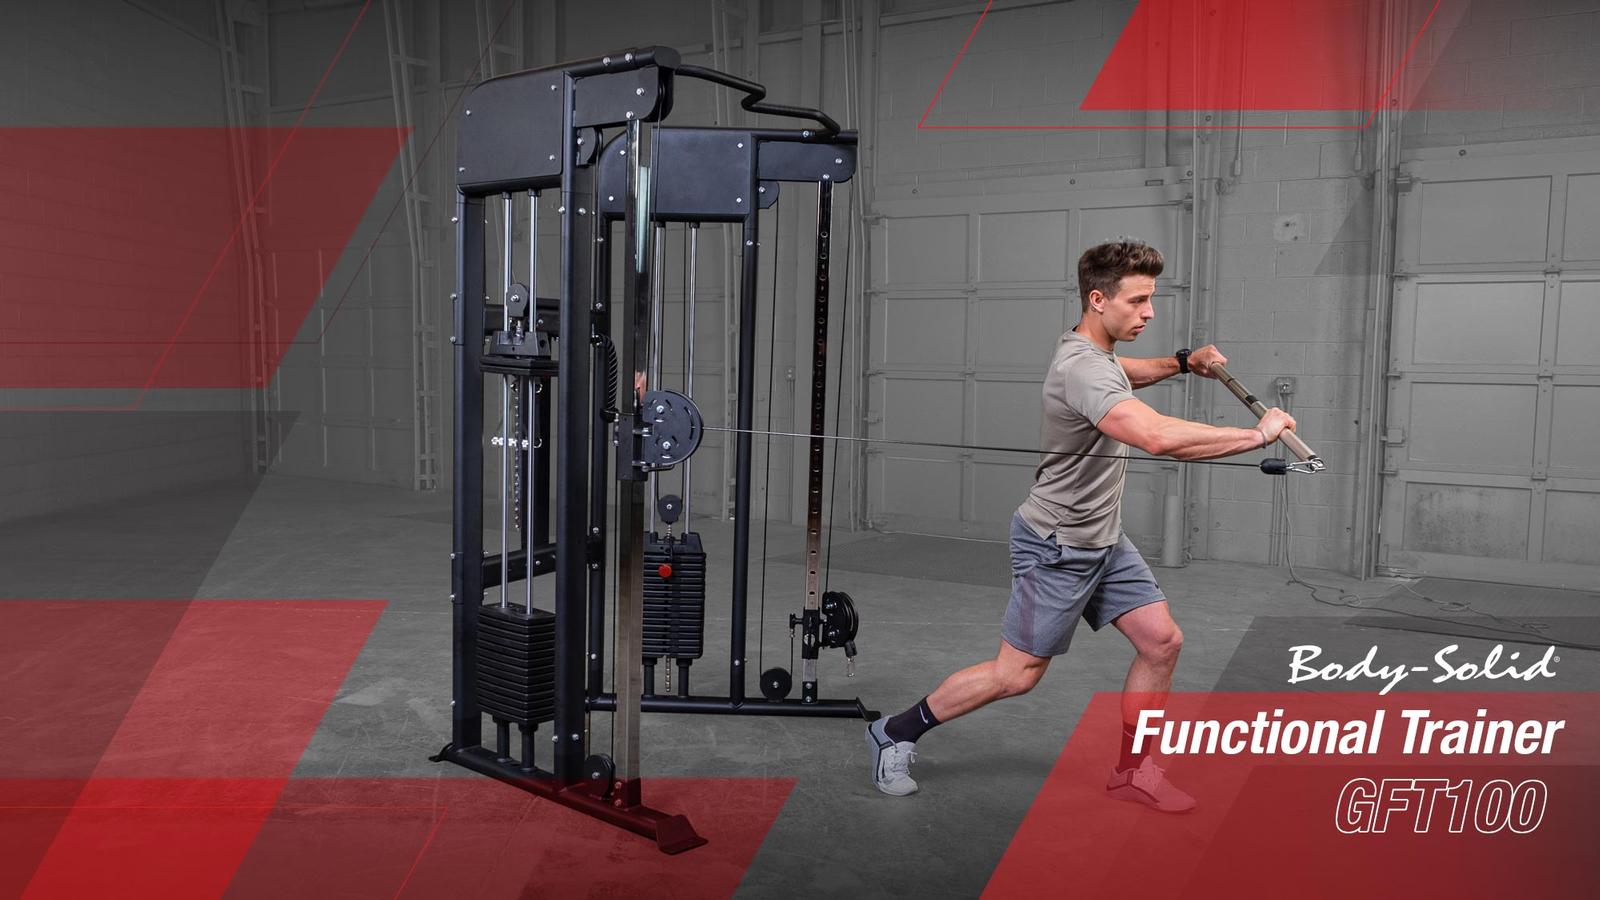 Body-Solid GFT100 Functional Trainer Banner